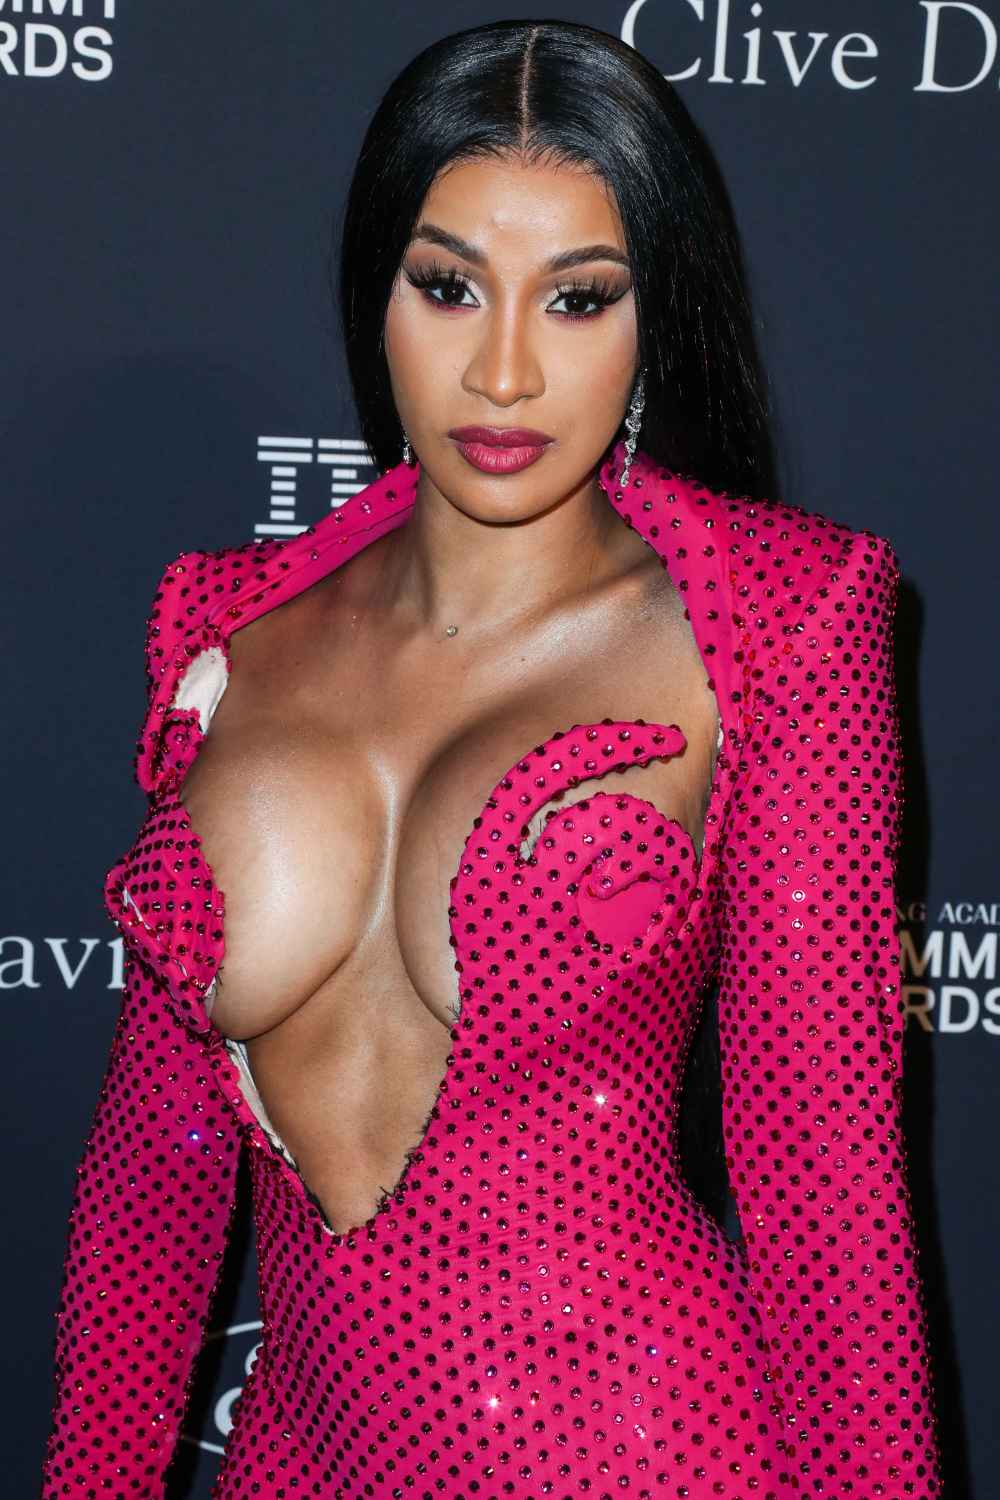 Cardi B Deletes Her Twitter Account After Backlash Over Offset Reconciliation